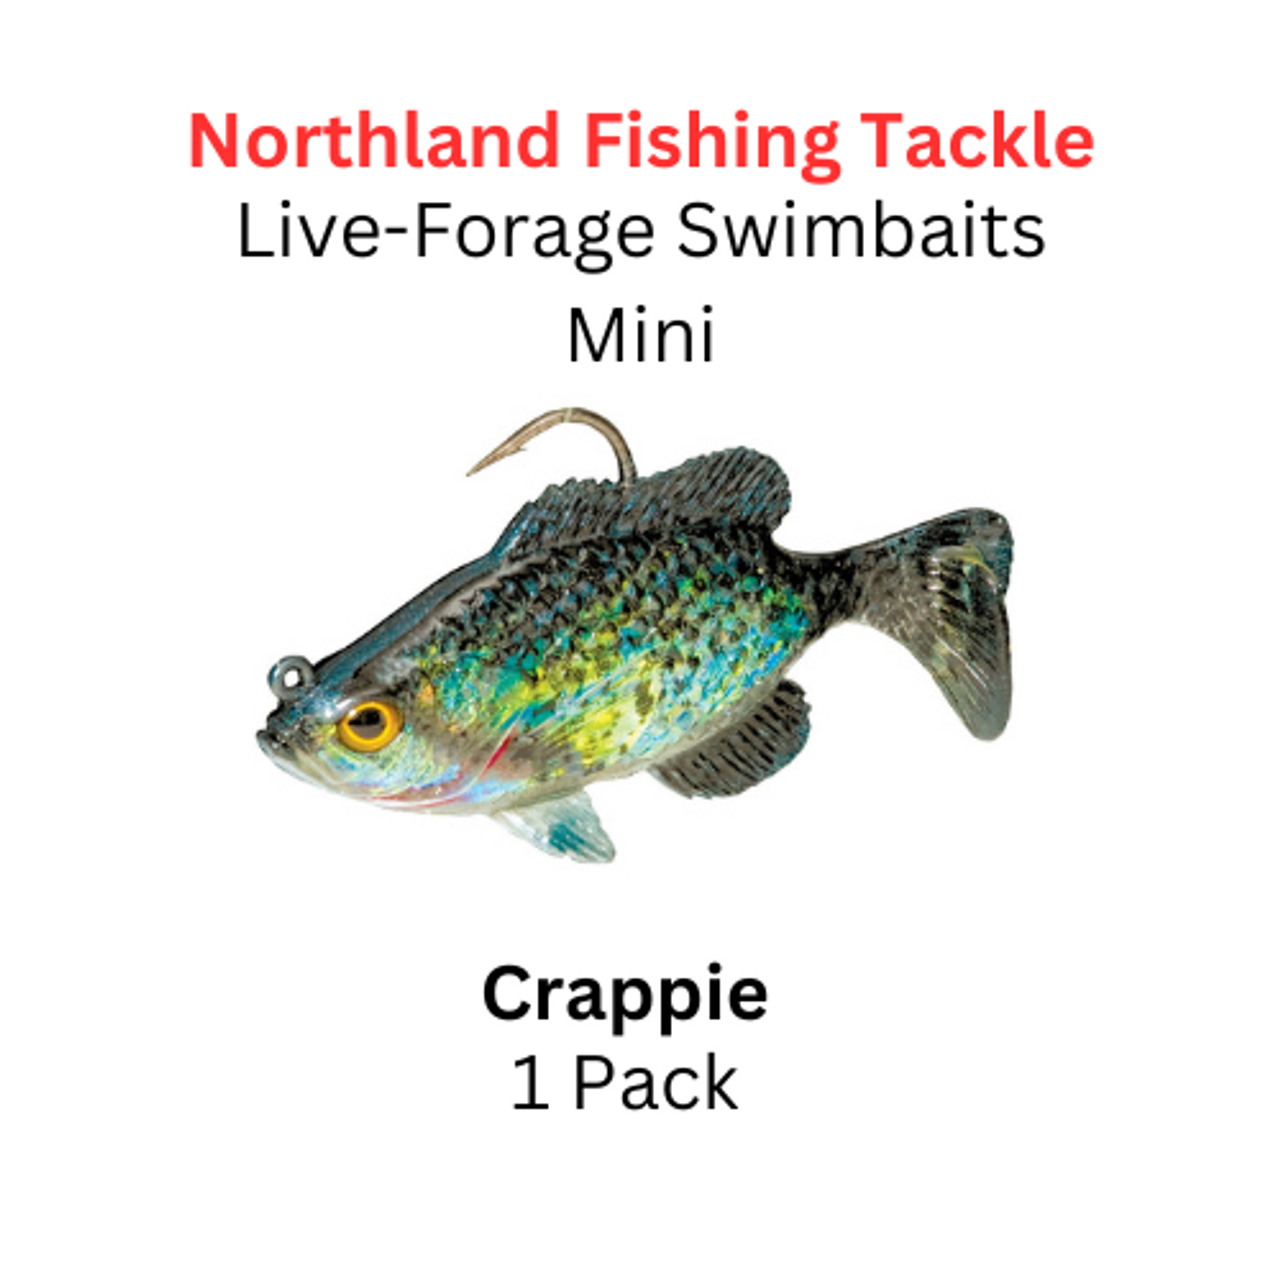 https://cdn11.bigcommerce.com/s-u9nbd/images/stencil/1280x1280/products/6453/16288/Northland_Fishing_Tackle_Live_forage_swimbait_mini_Crappie__34645.1678230419.png?c=2